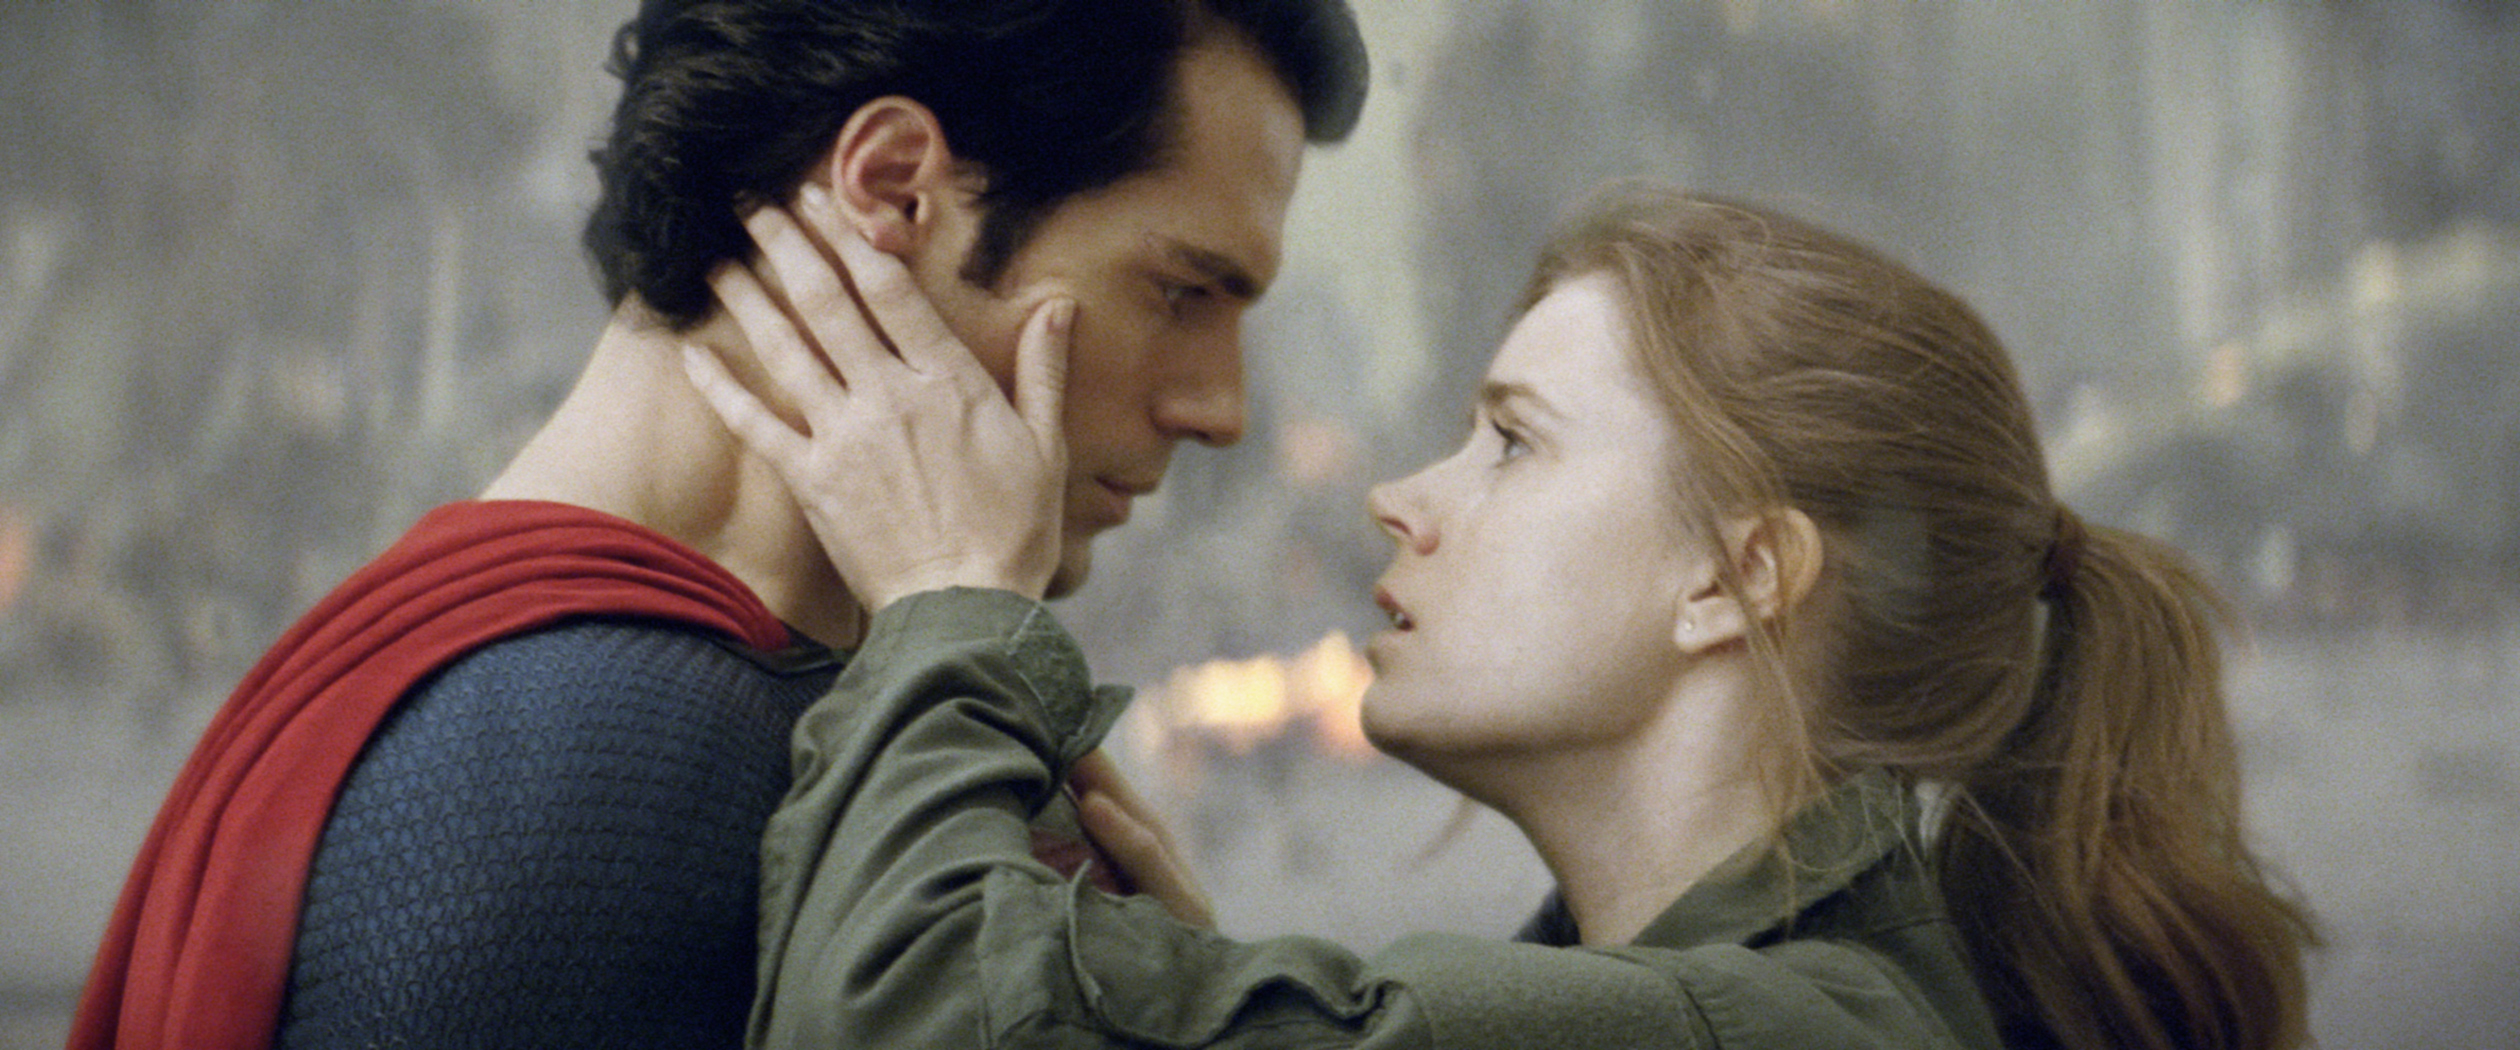 Henry as superman being embraced by Amy Adams as Lois Lane